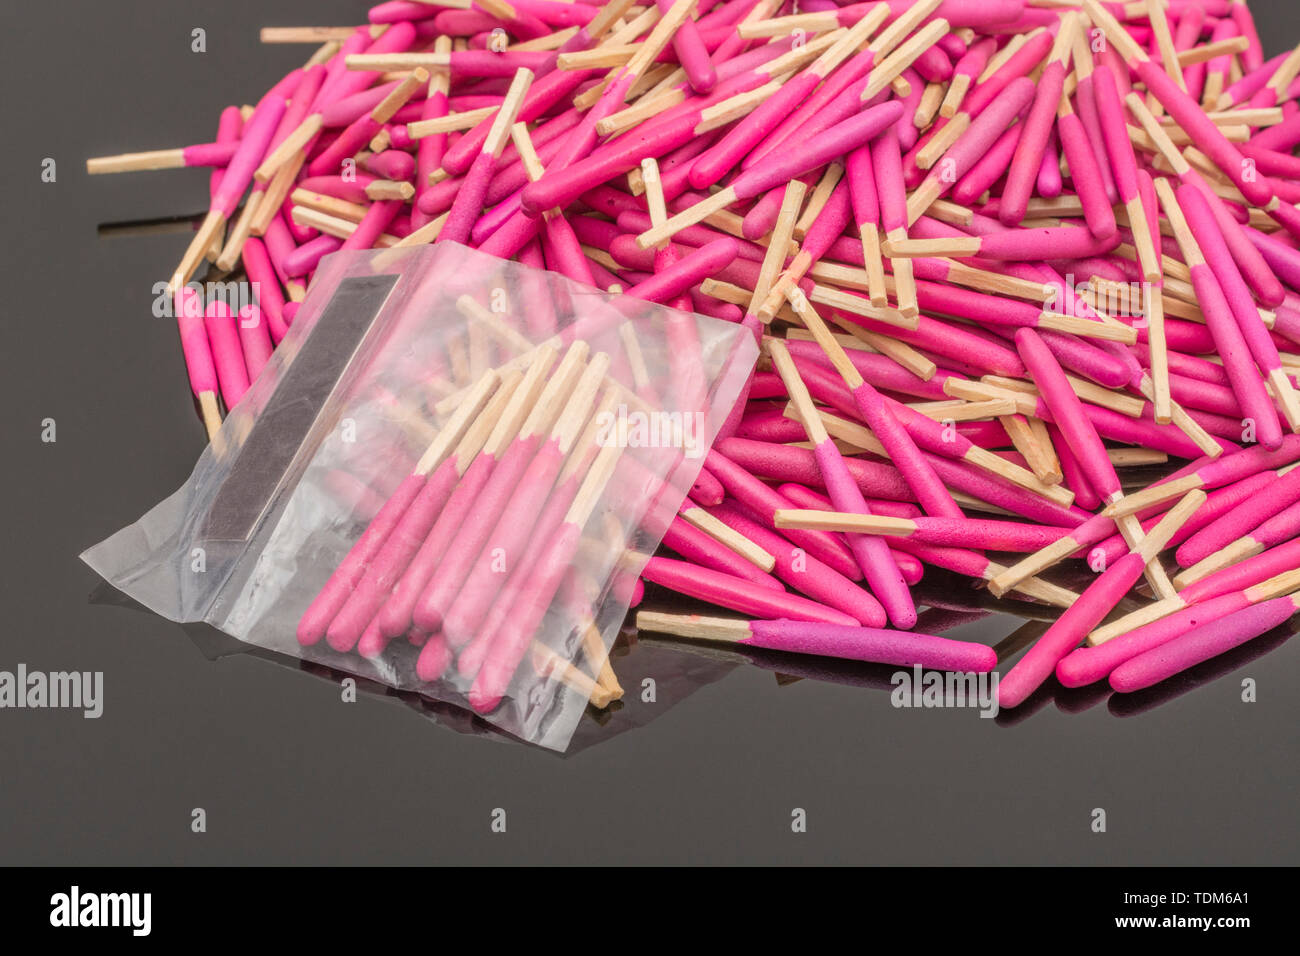 Random pile of waterproof emergency matches. Metaphor survival skills, chaotic mind, disorganized, random, lost in the crowd, untidy mind. Stock Photo